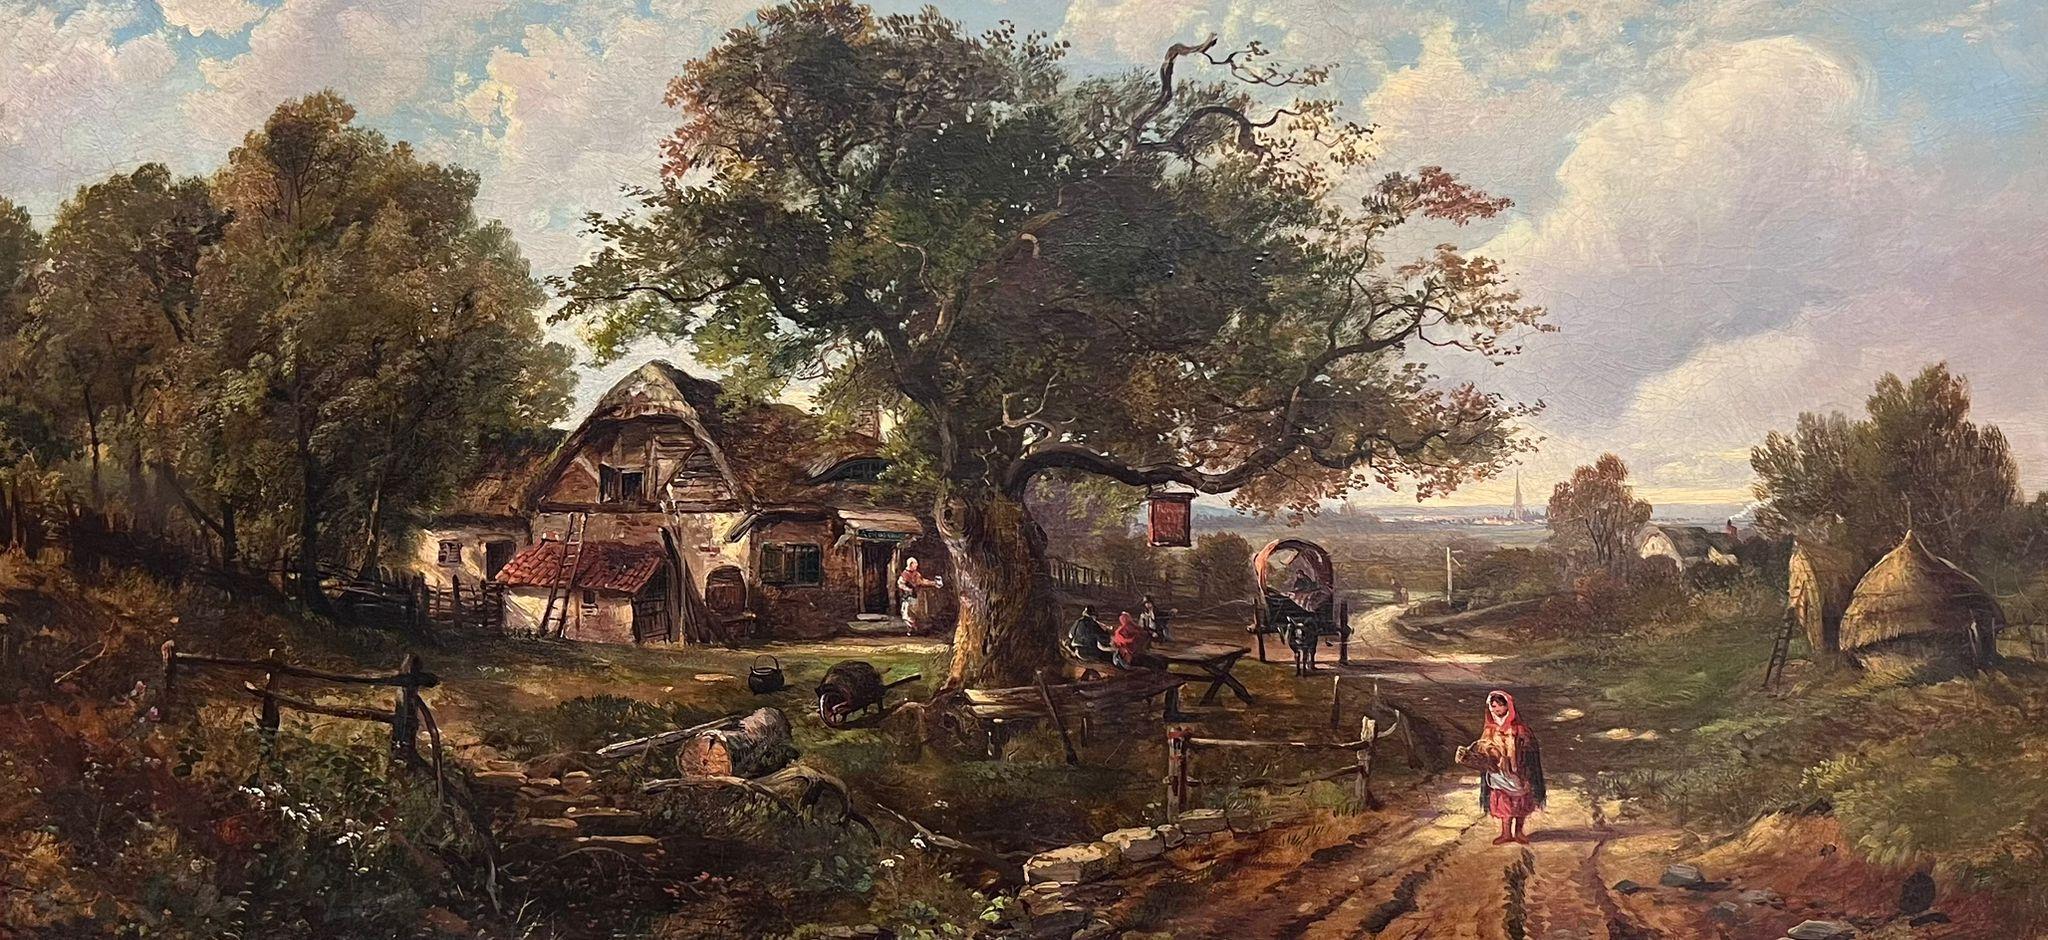 The Country lane
by Frans Hopfner (1840-1893) German
signed oil on canvas, framed
framed: 23.5 x 41.5 inches
canvas: 18 x 36 inches
provenance: private collection, UK
condition: very good and sound condition (please note, due to the fragility of old